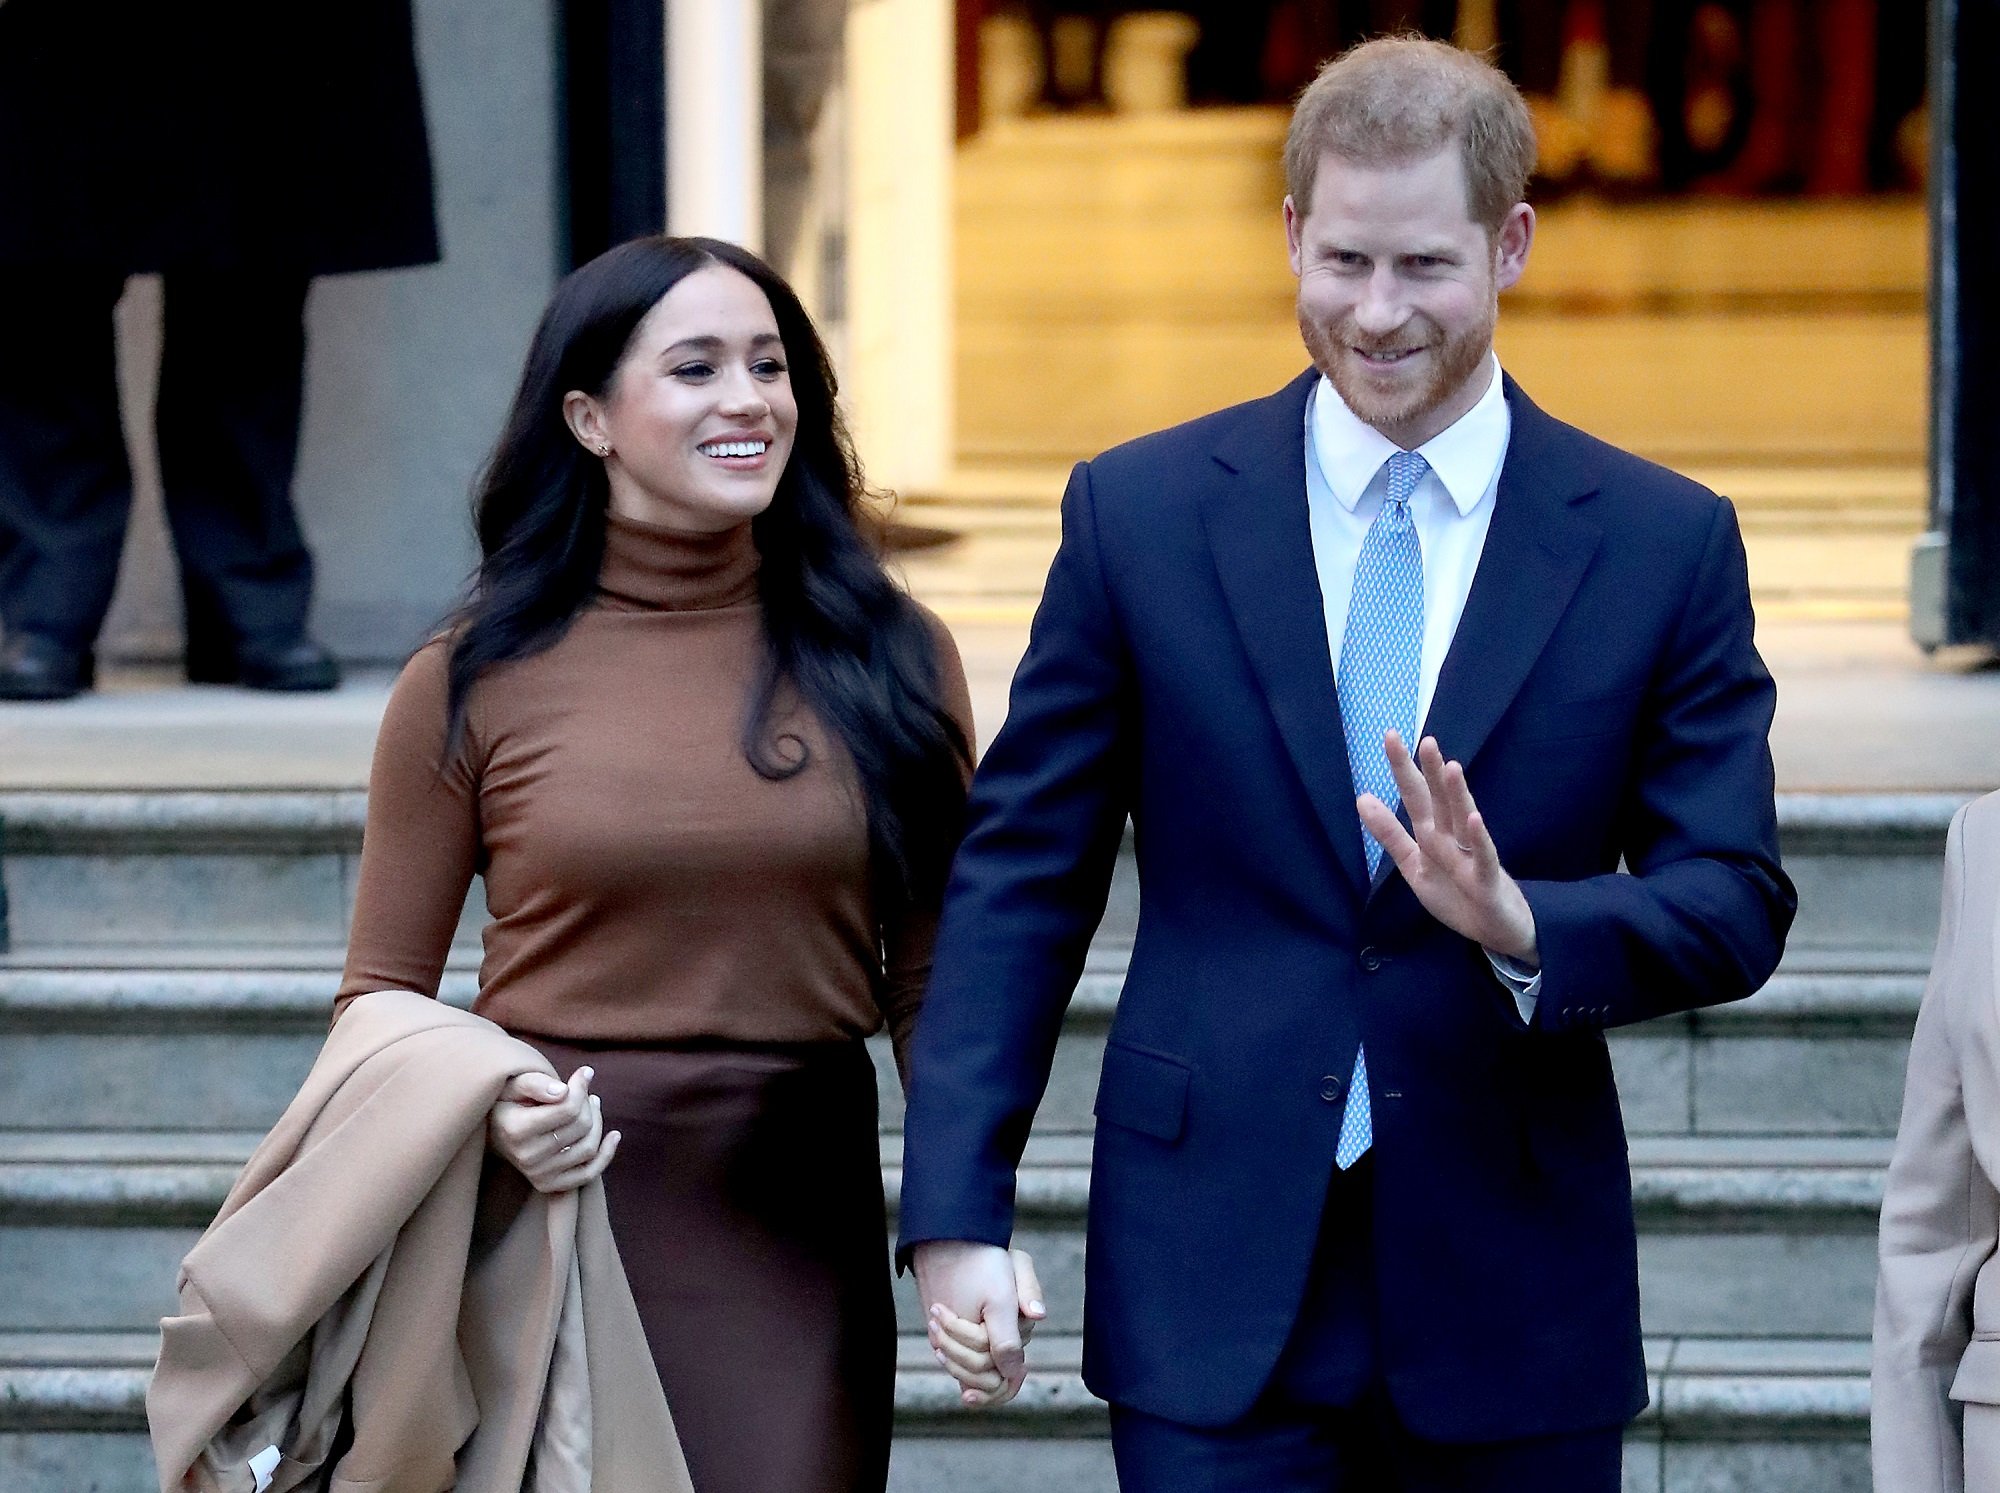 Meghan Markle wears a brown outfit holding hands with Prince Harry in a suit